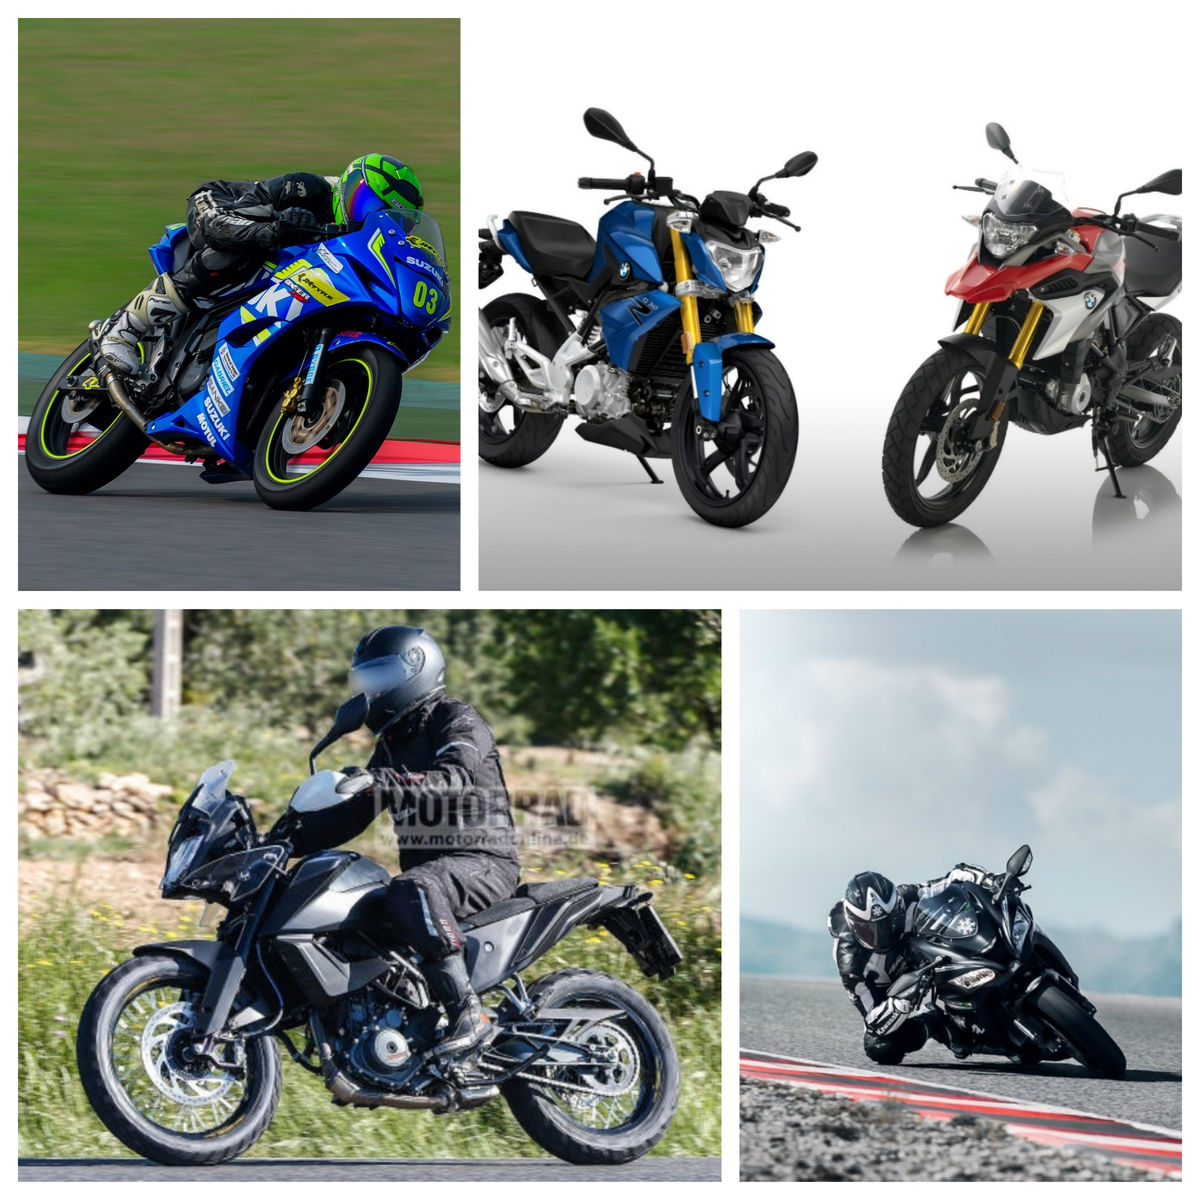 Weekly Round-up: KTM 390 Spied, G 310 R And G 310 GS Launch Date, Ninja ZX-10R And ZX-10RR Price Drop And More Weekly Round-up: KTM 390 Spied, G 310 R And G 310 GS Launch Date, Ninja ZX-10R And ZX-10RR Price Drop And More